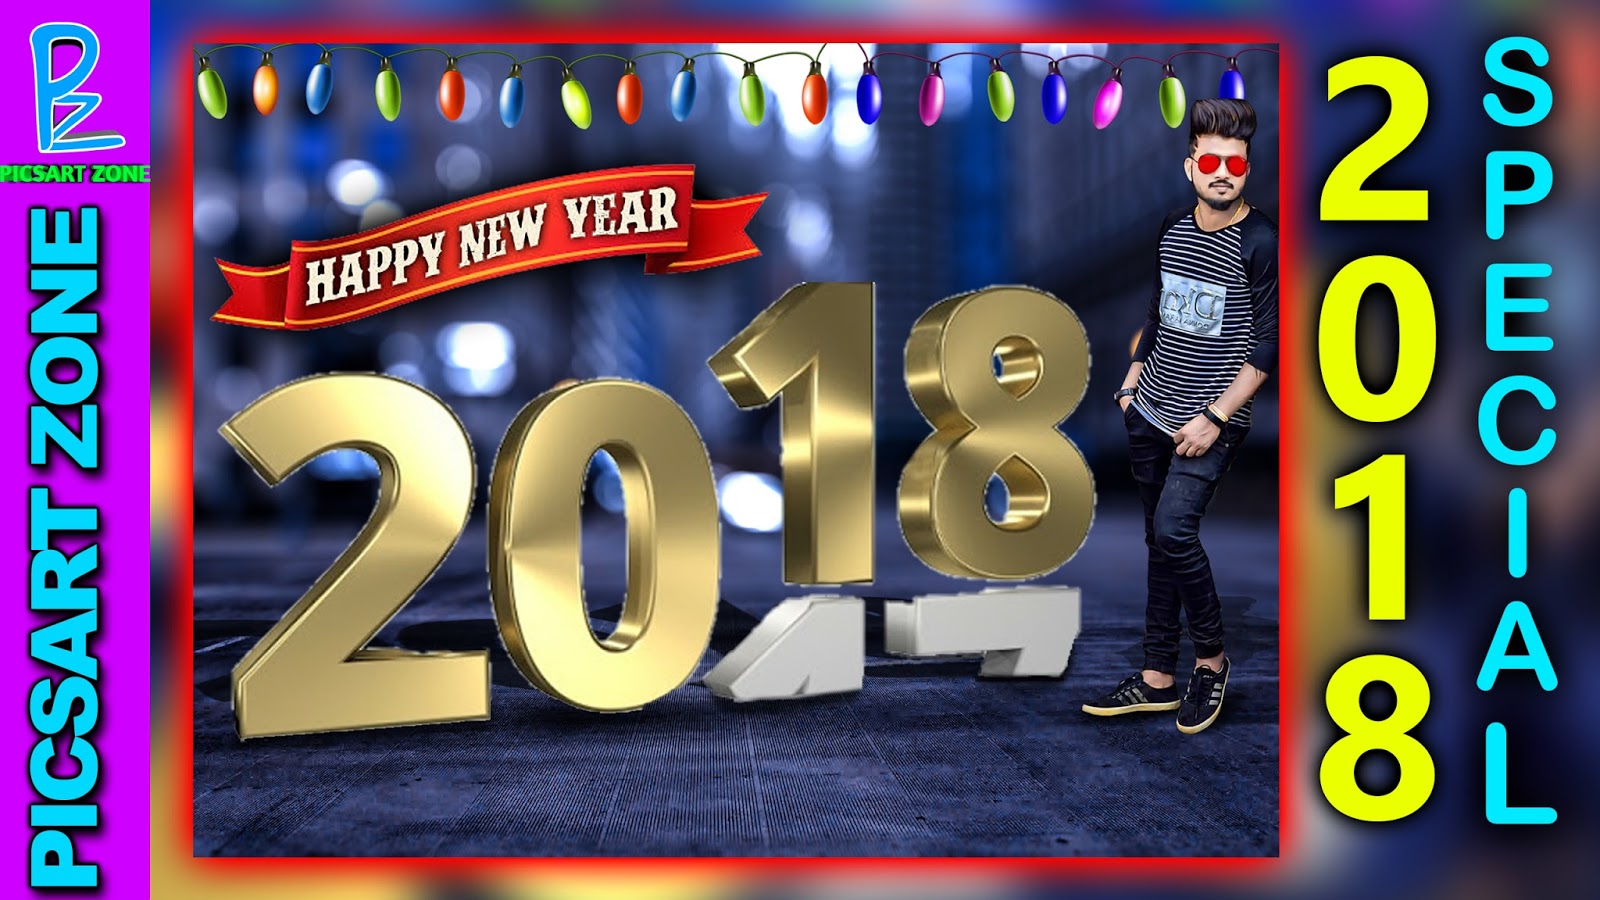 HAPPY NEW YEAR 2018 PHOTO EDITING NEW YEAR PHOTO EDITING IN